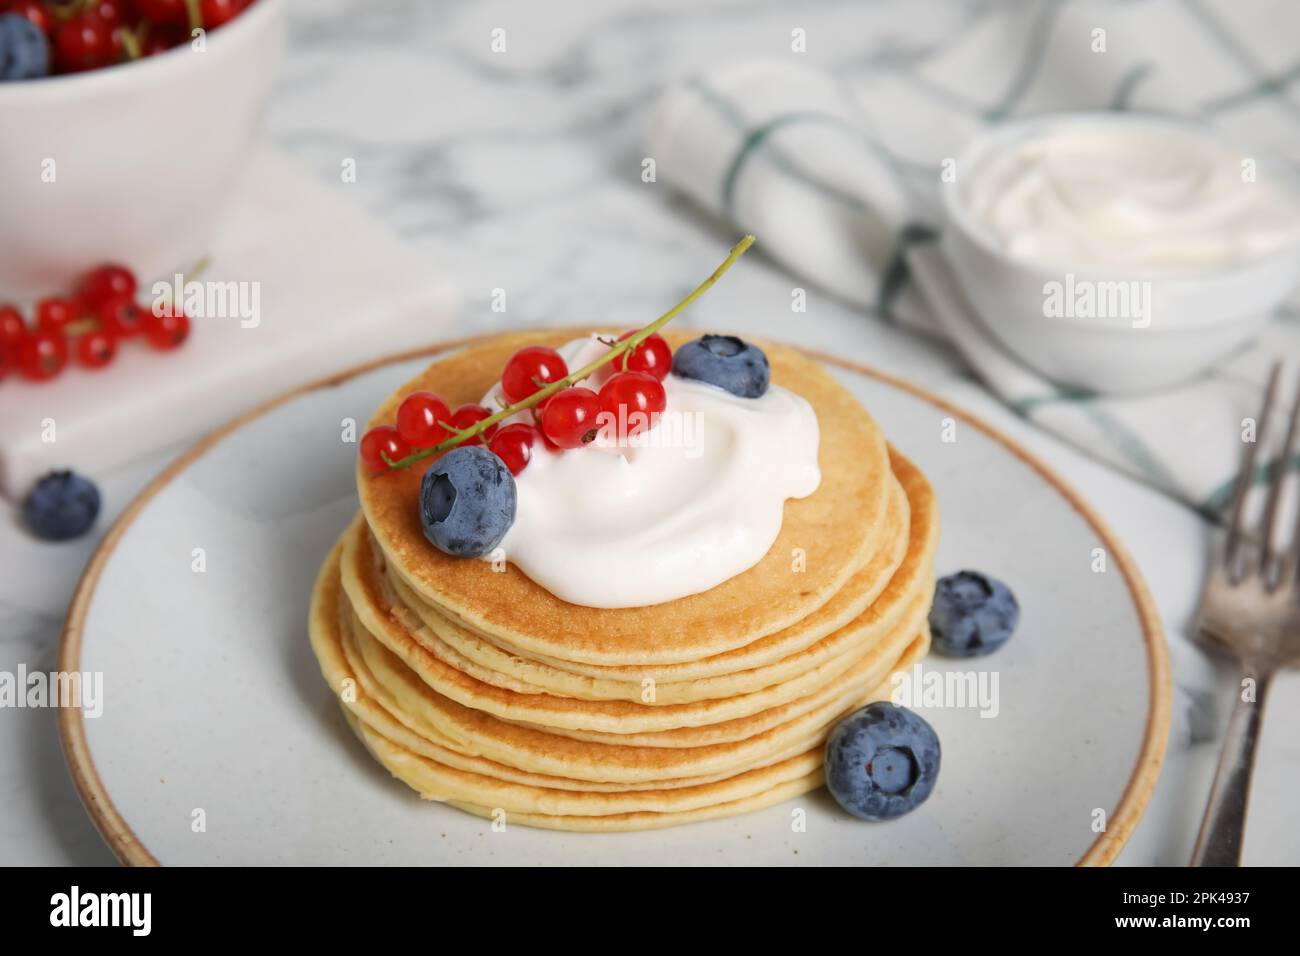 Tasty pancakes with natural yogurt, blueberries and red currants on marble table Stock Photo